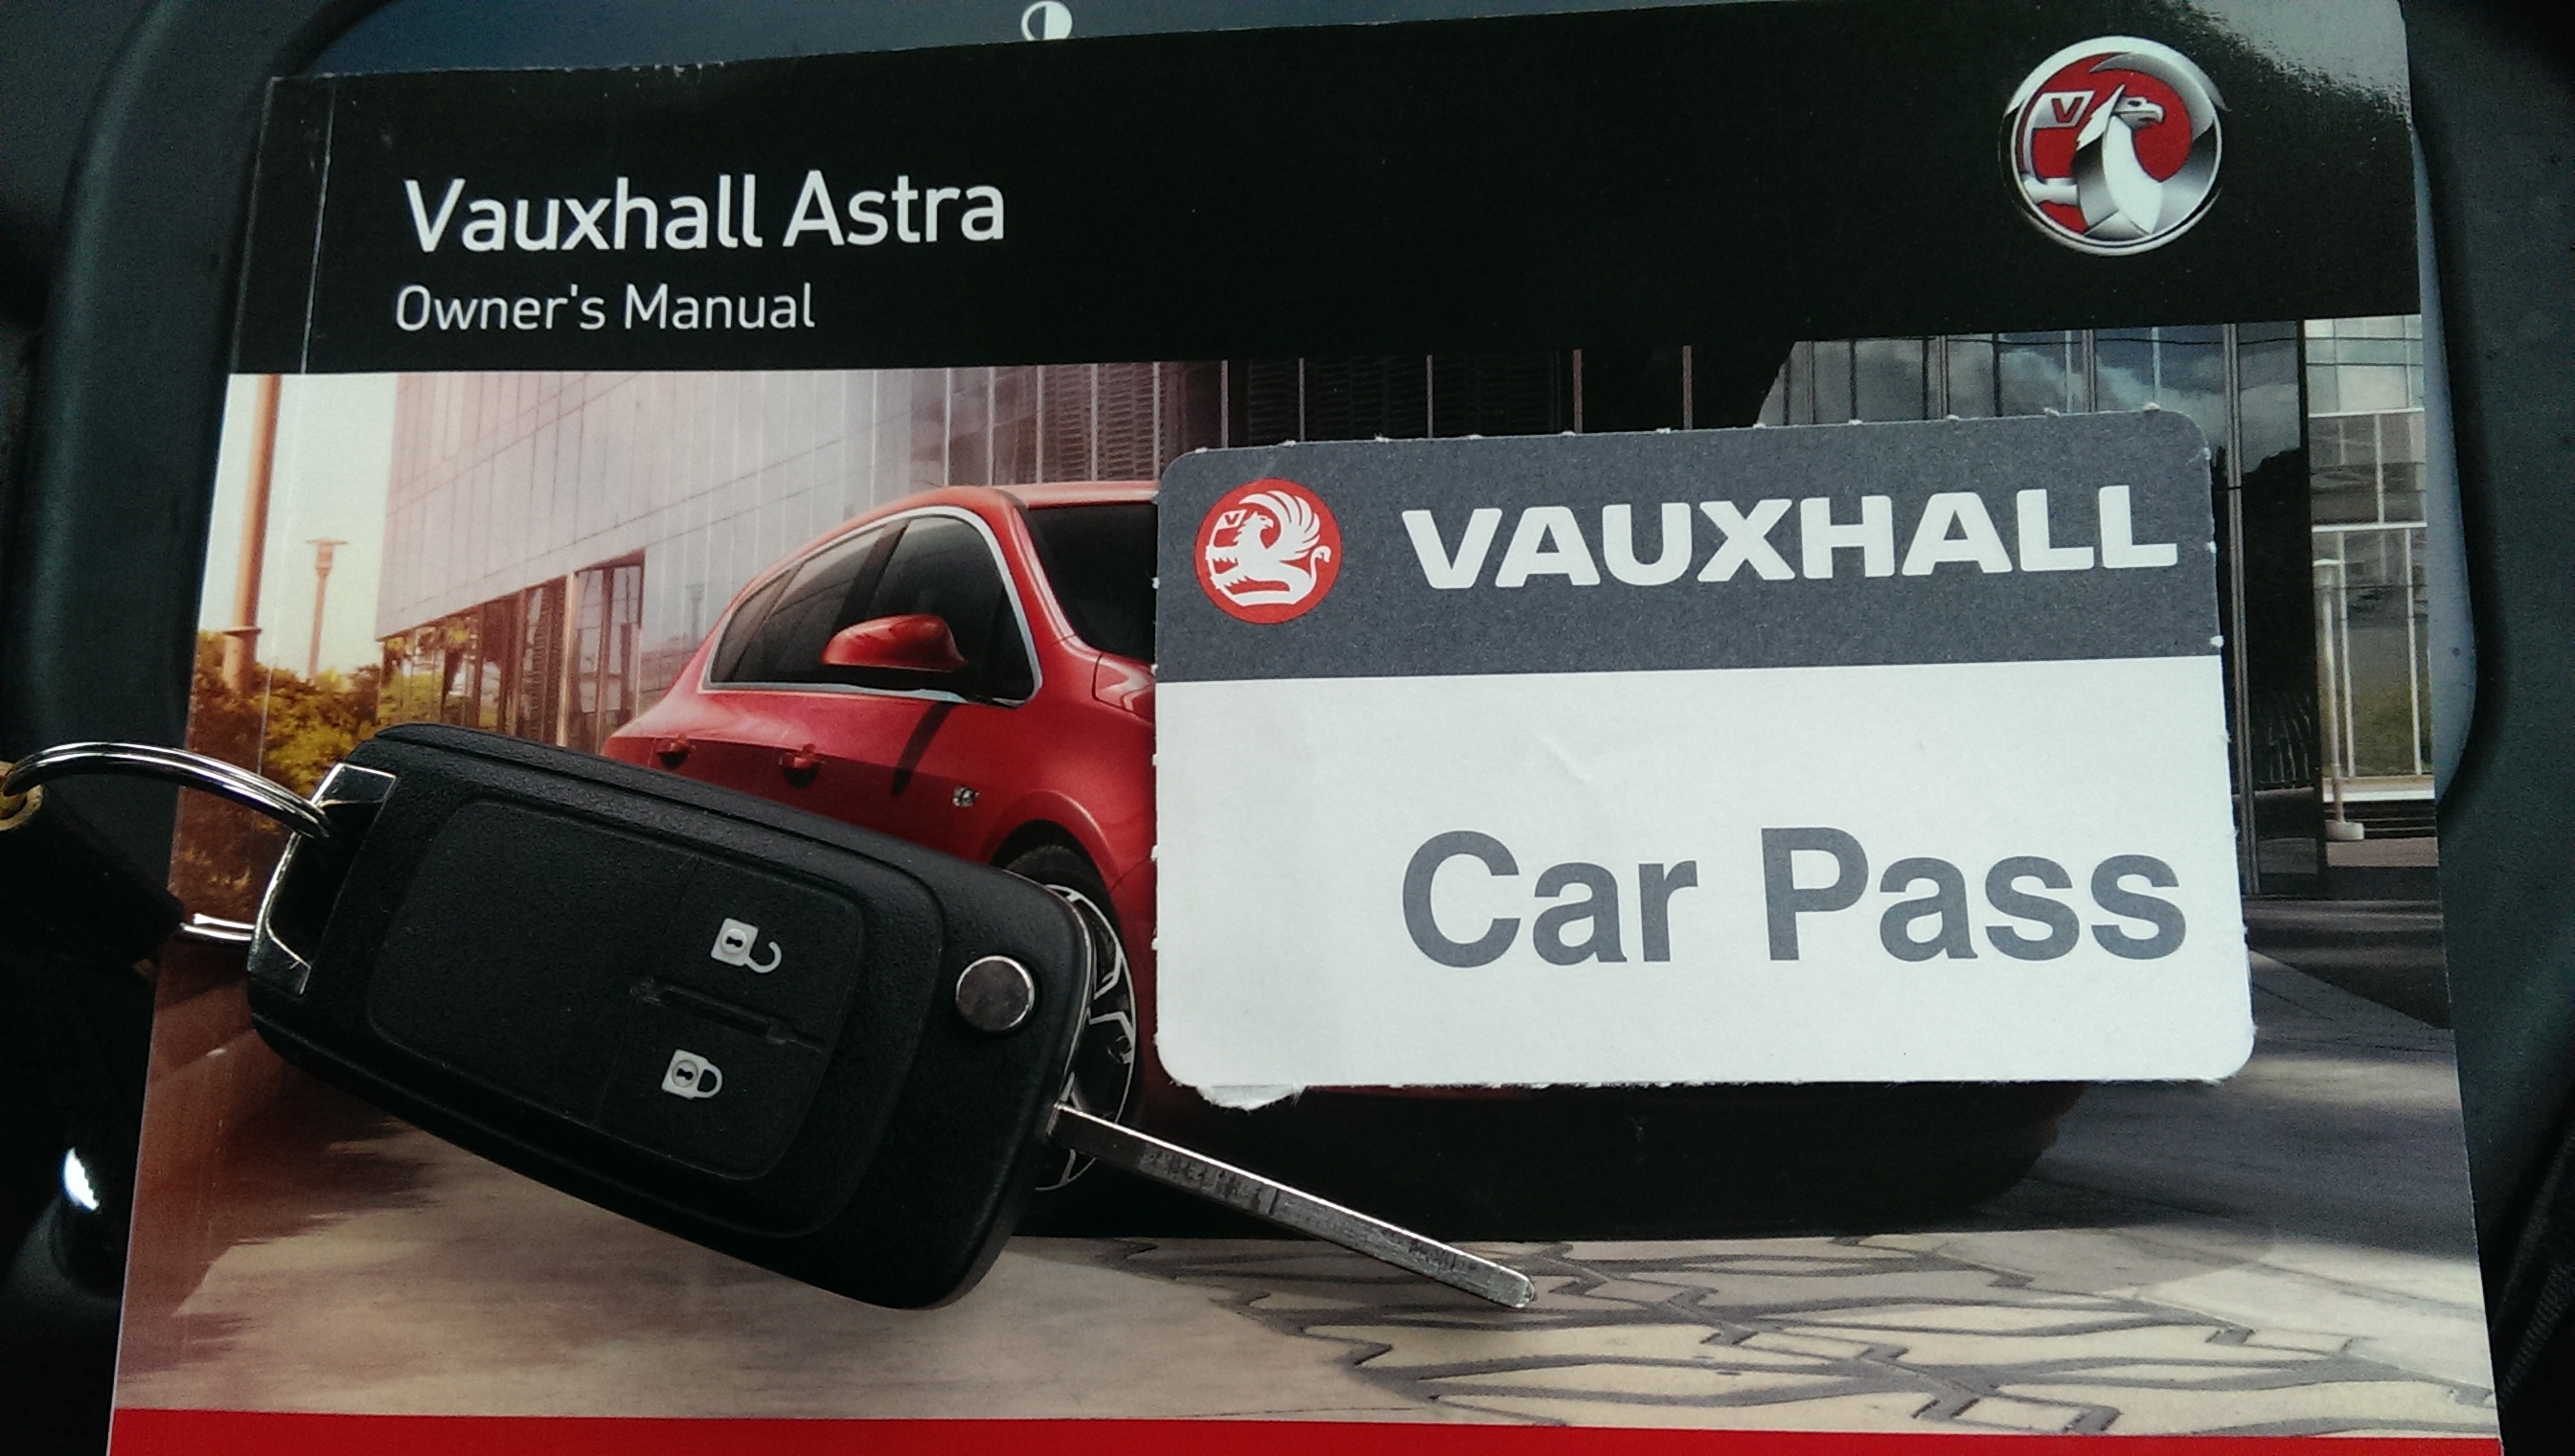 What is a car pass Vauxhall?